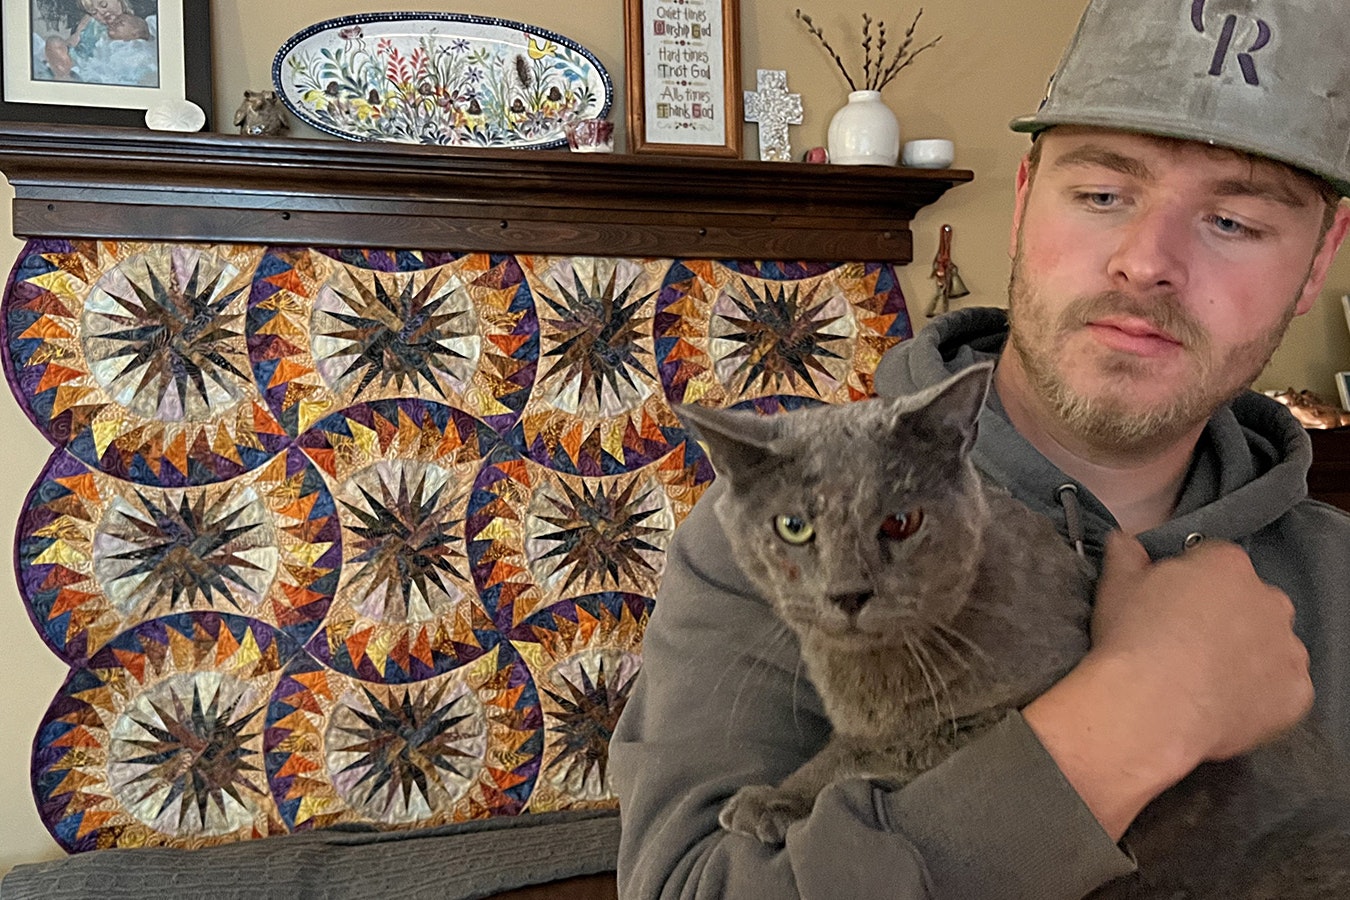 Jacob Lee of Cheyenne holds his cat Walter, which was tortured and shot 19 times with a pellet gun. The cat is recovering, but is blind in its left eye now and still has the pellets in him.